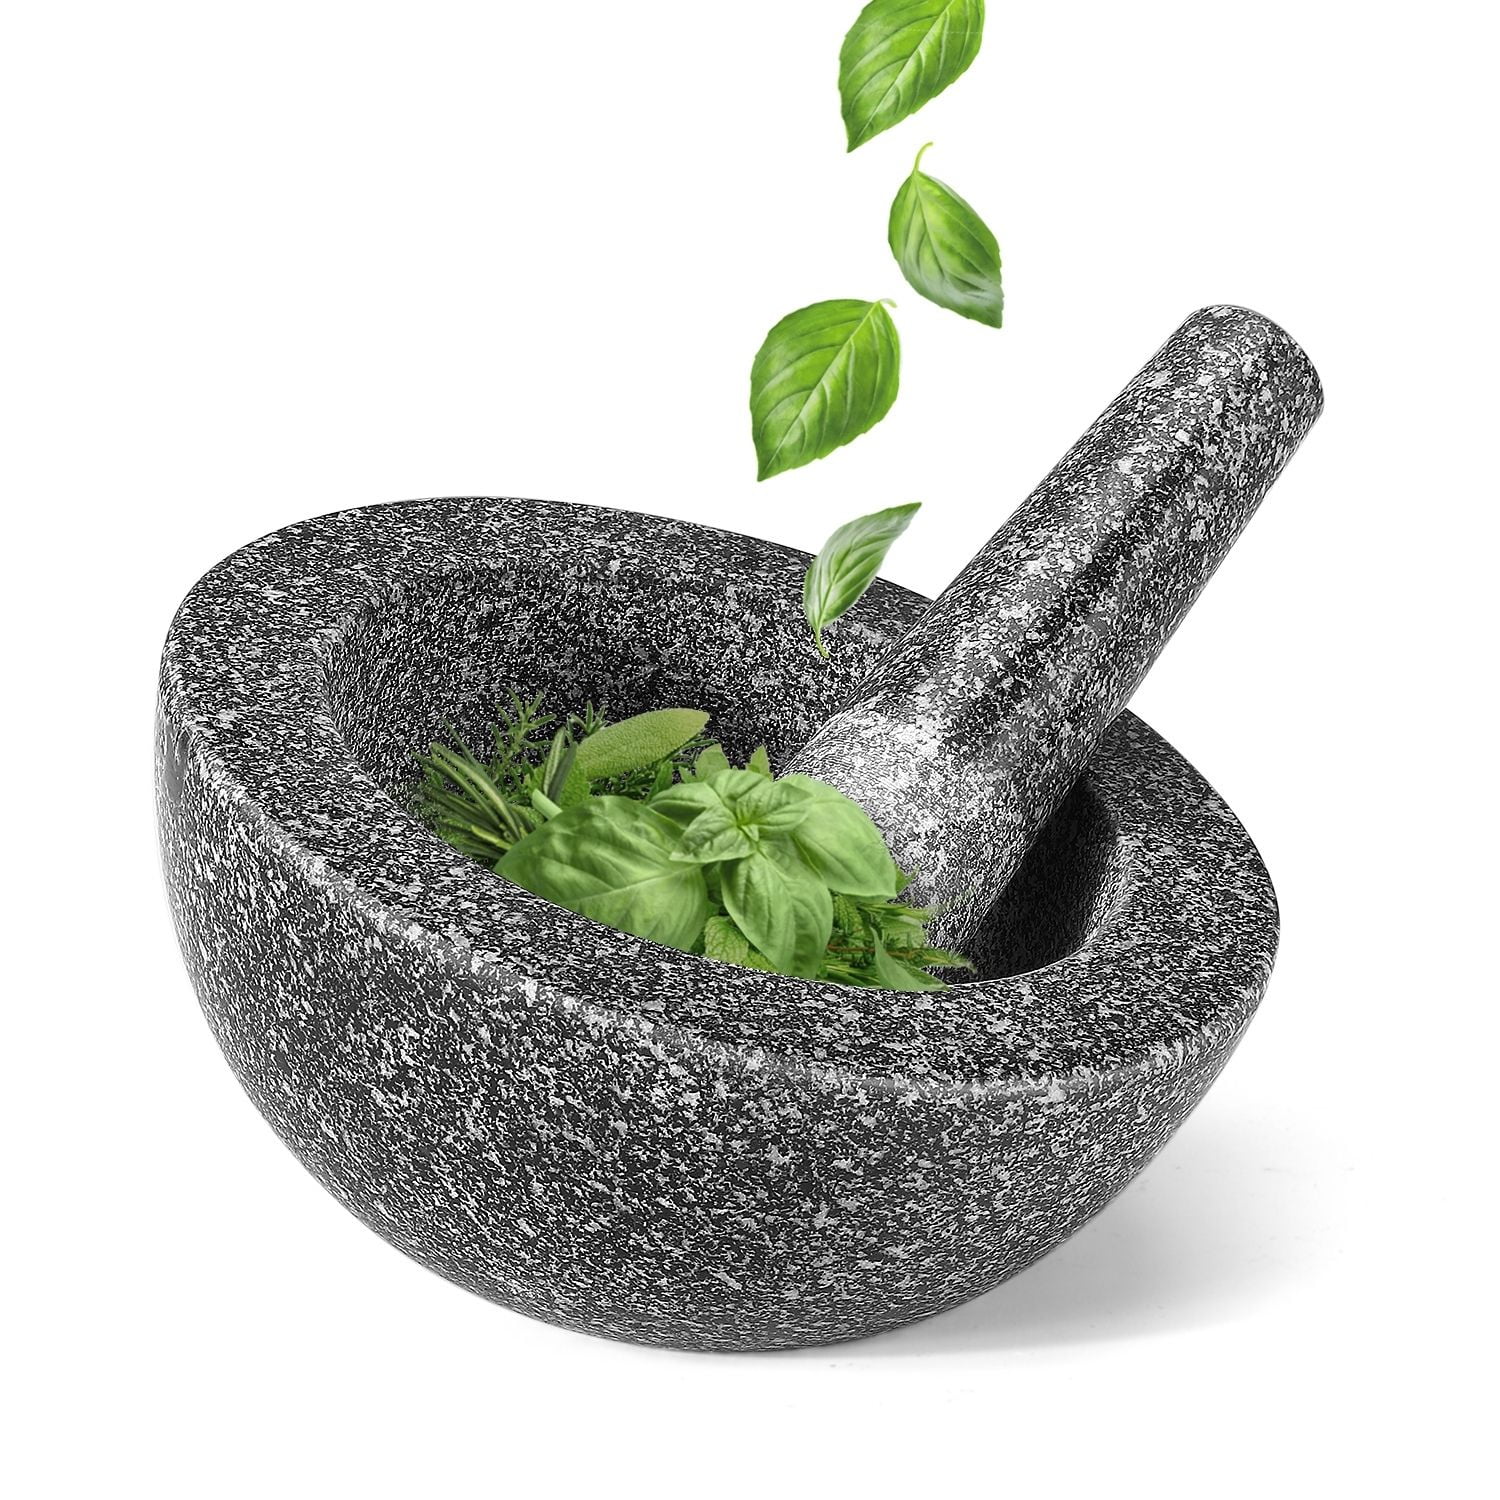 Details about   Small Mortar And Pestle Set Granite Stone For Spice Herb Grinder Molcajete NEW 